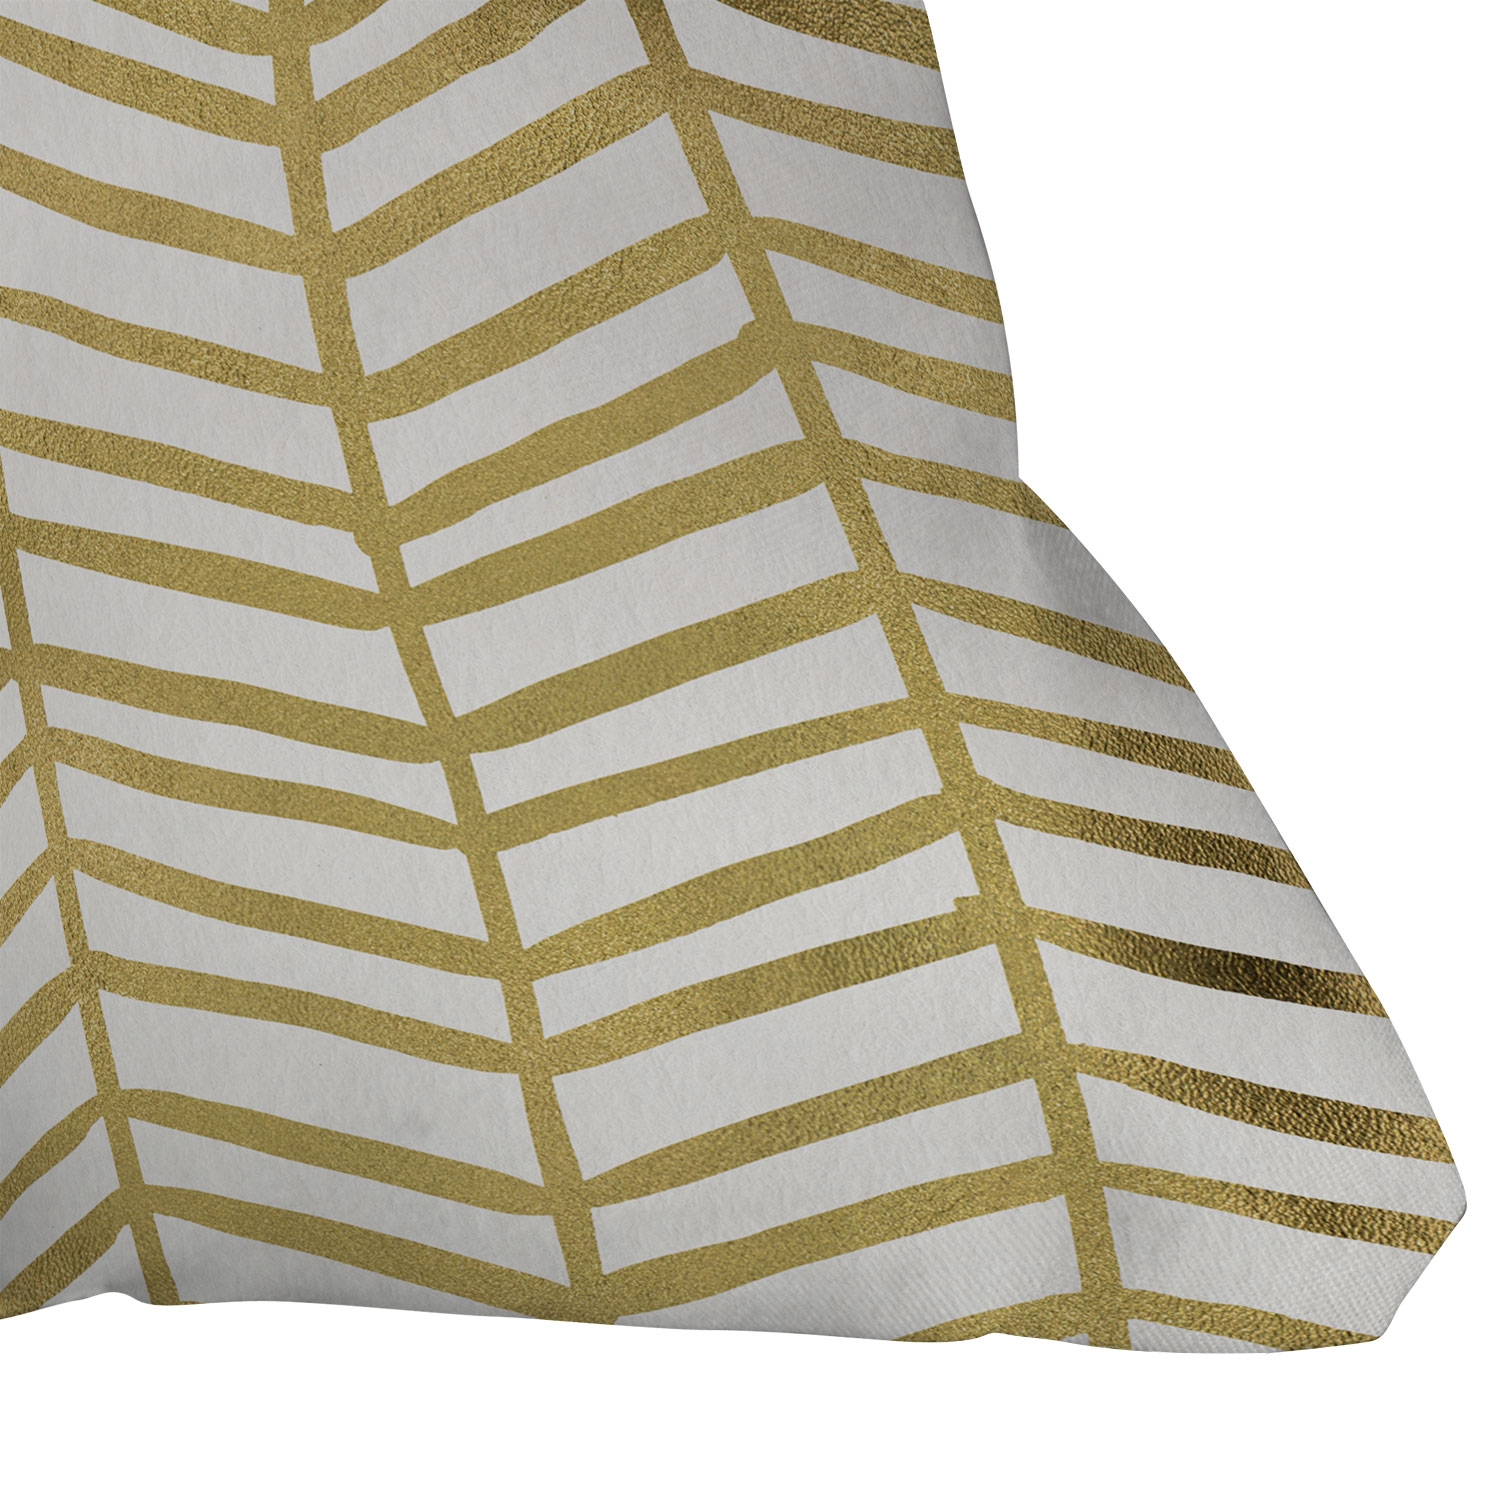 Gold Herringbone by Cat Coquillette - Outdoor Throw Pillow 16" x 16" - Image 1